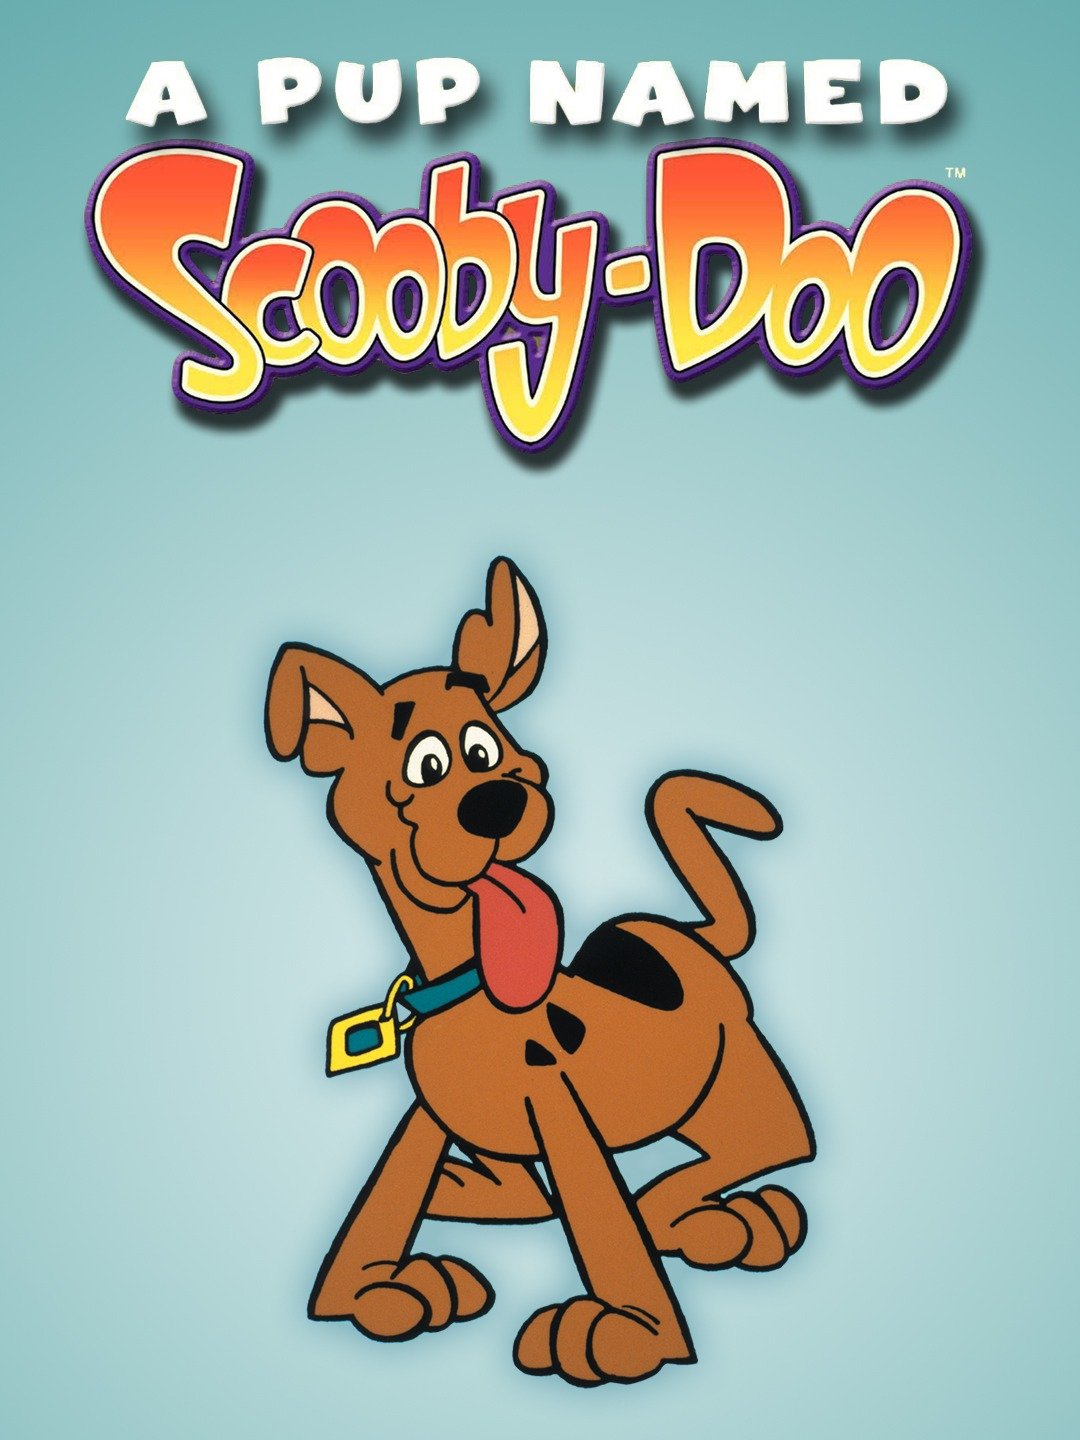 A pup named scooby-doo